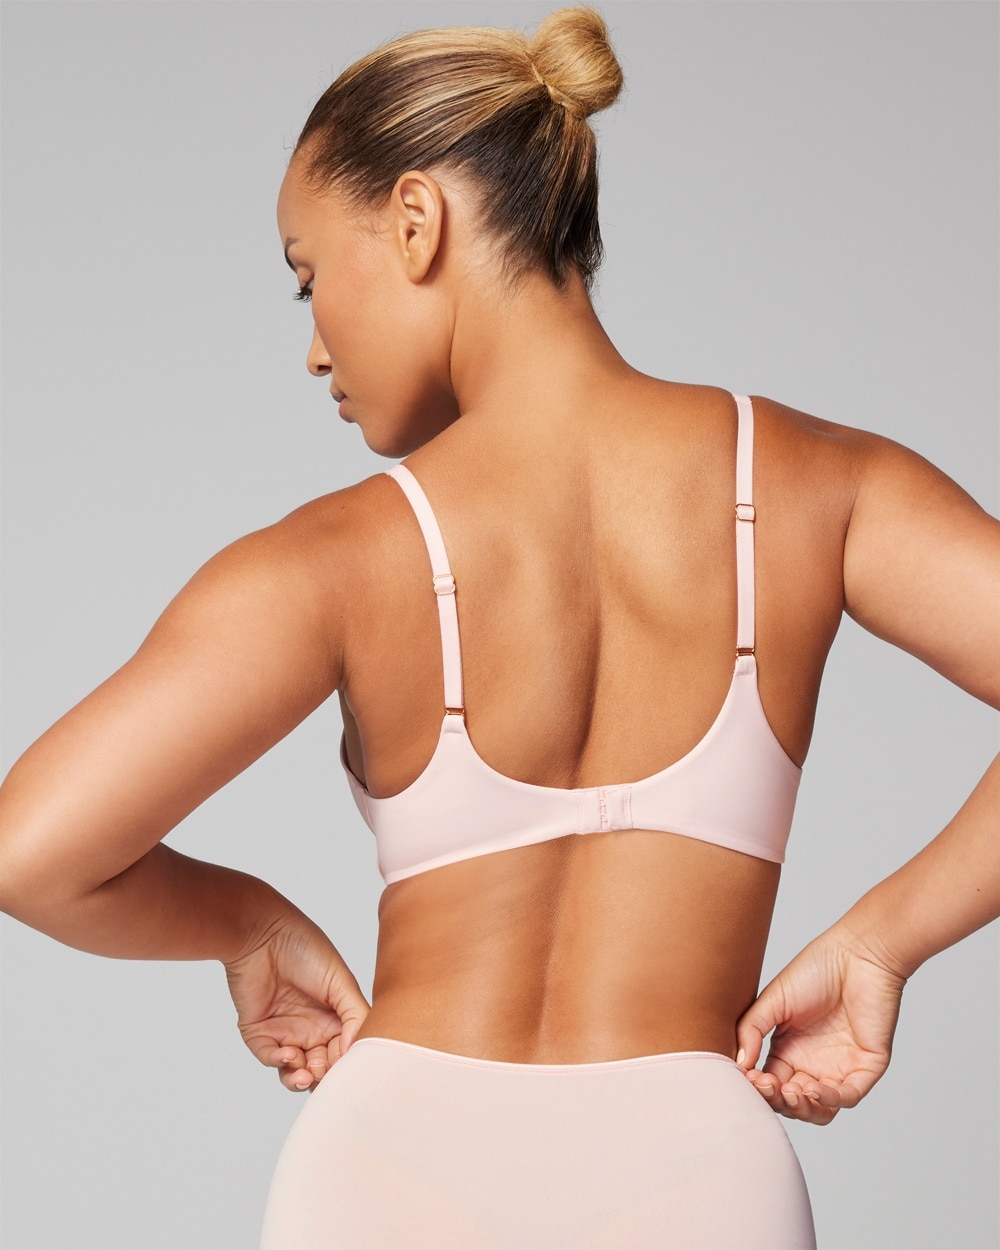 Soma launches Bodify smart bra based on three years of consumer